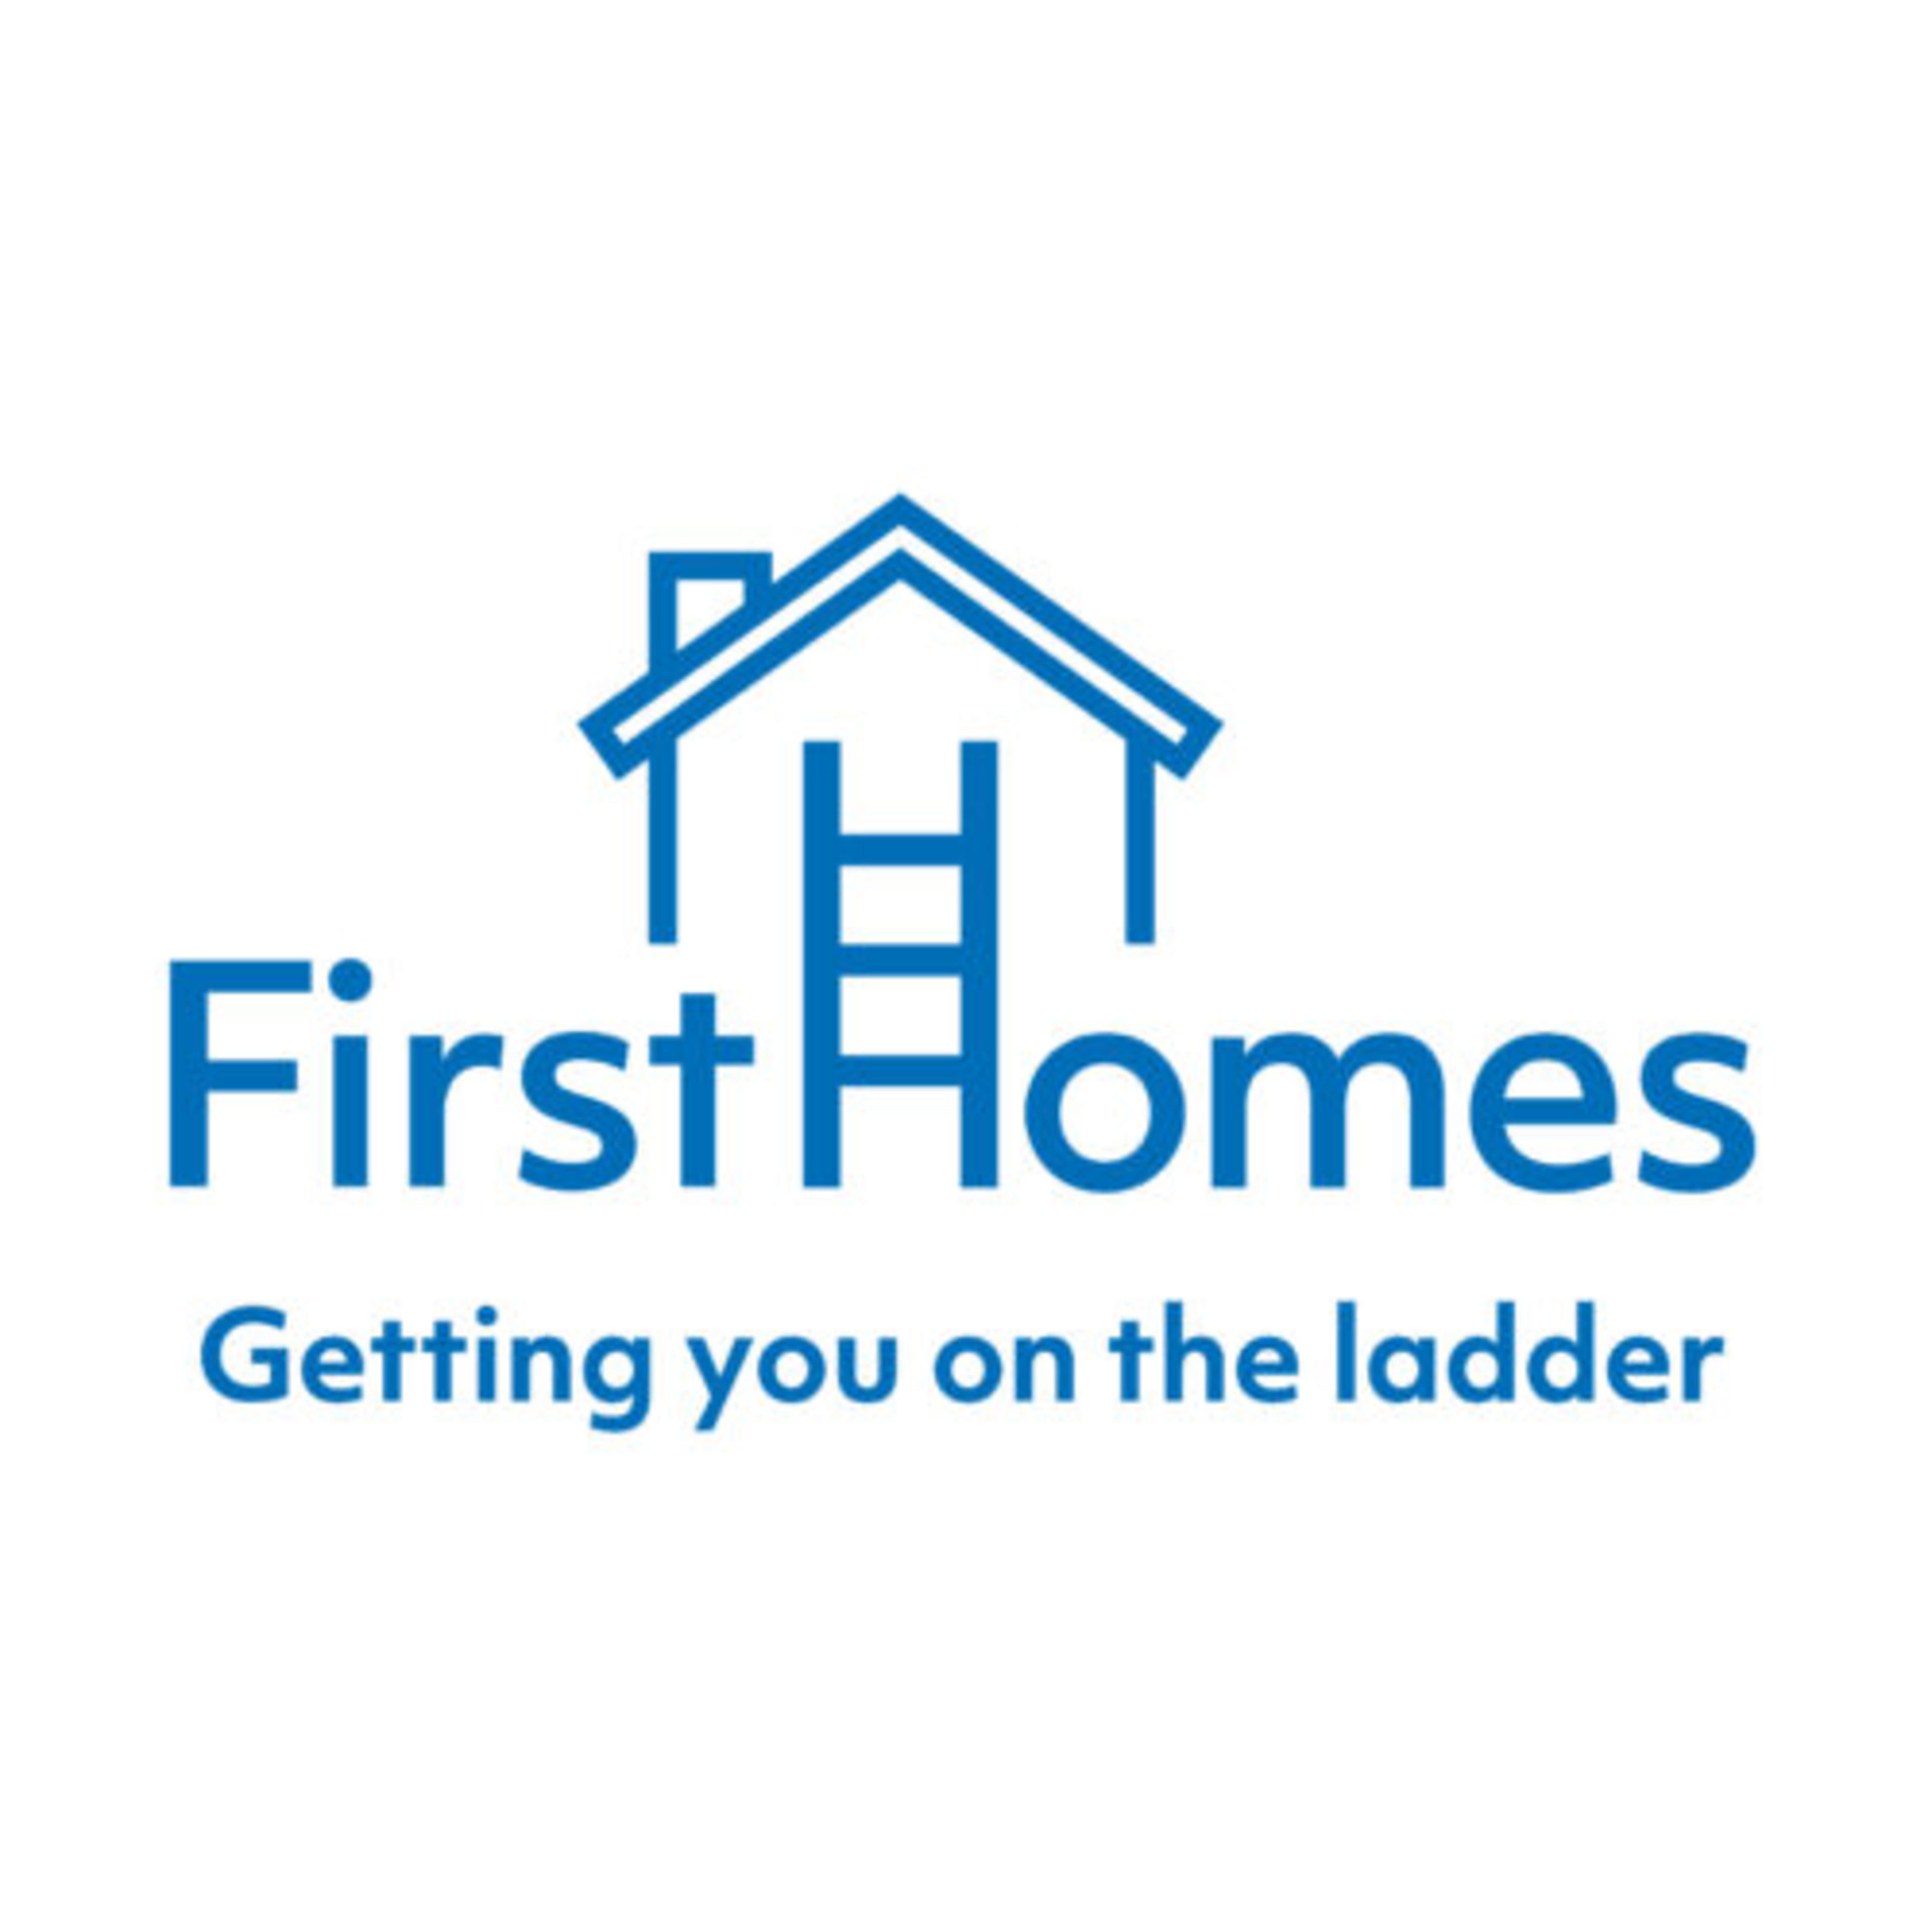 The First Homes logo